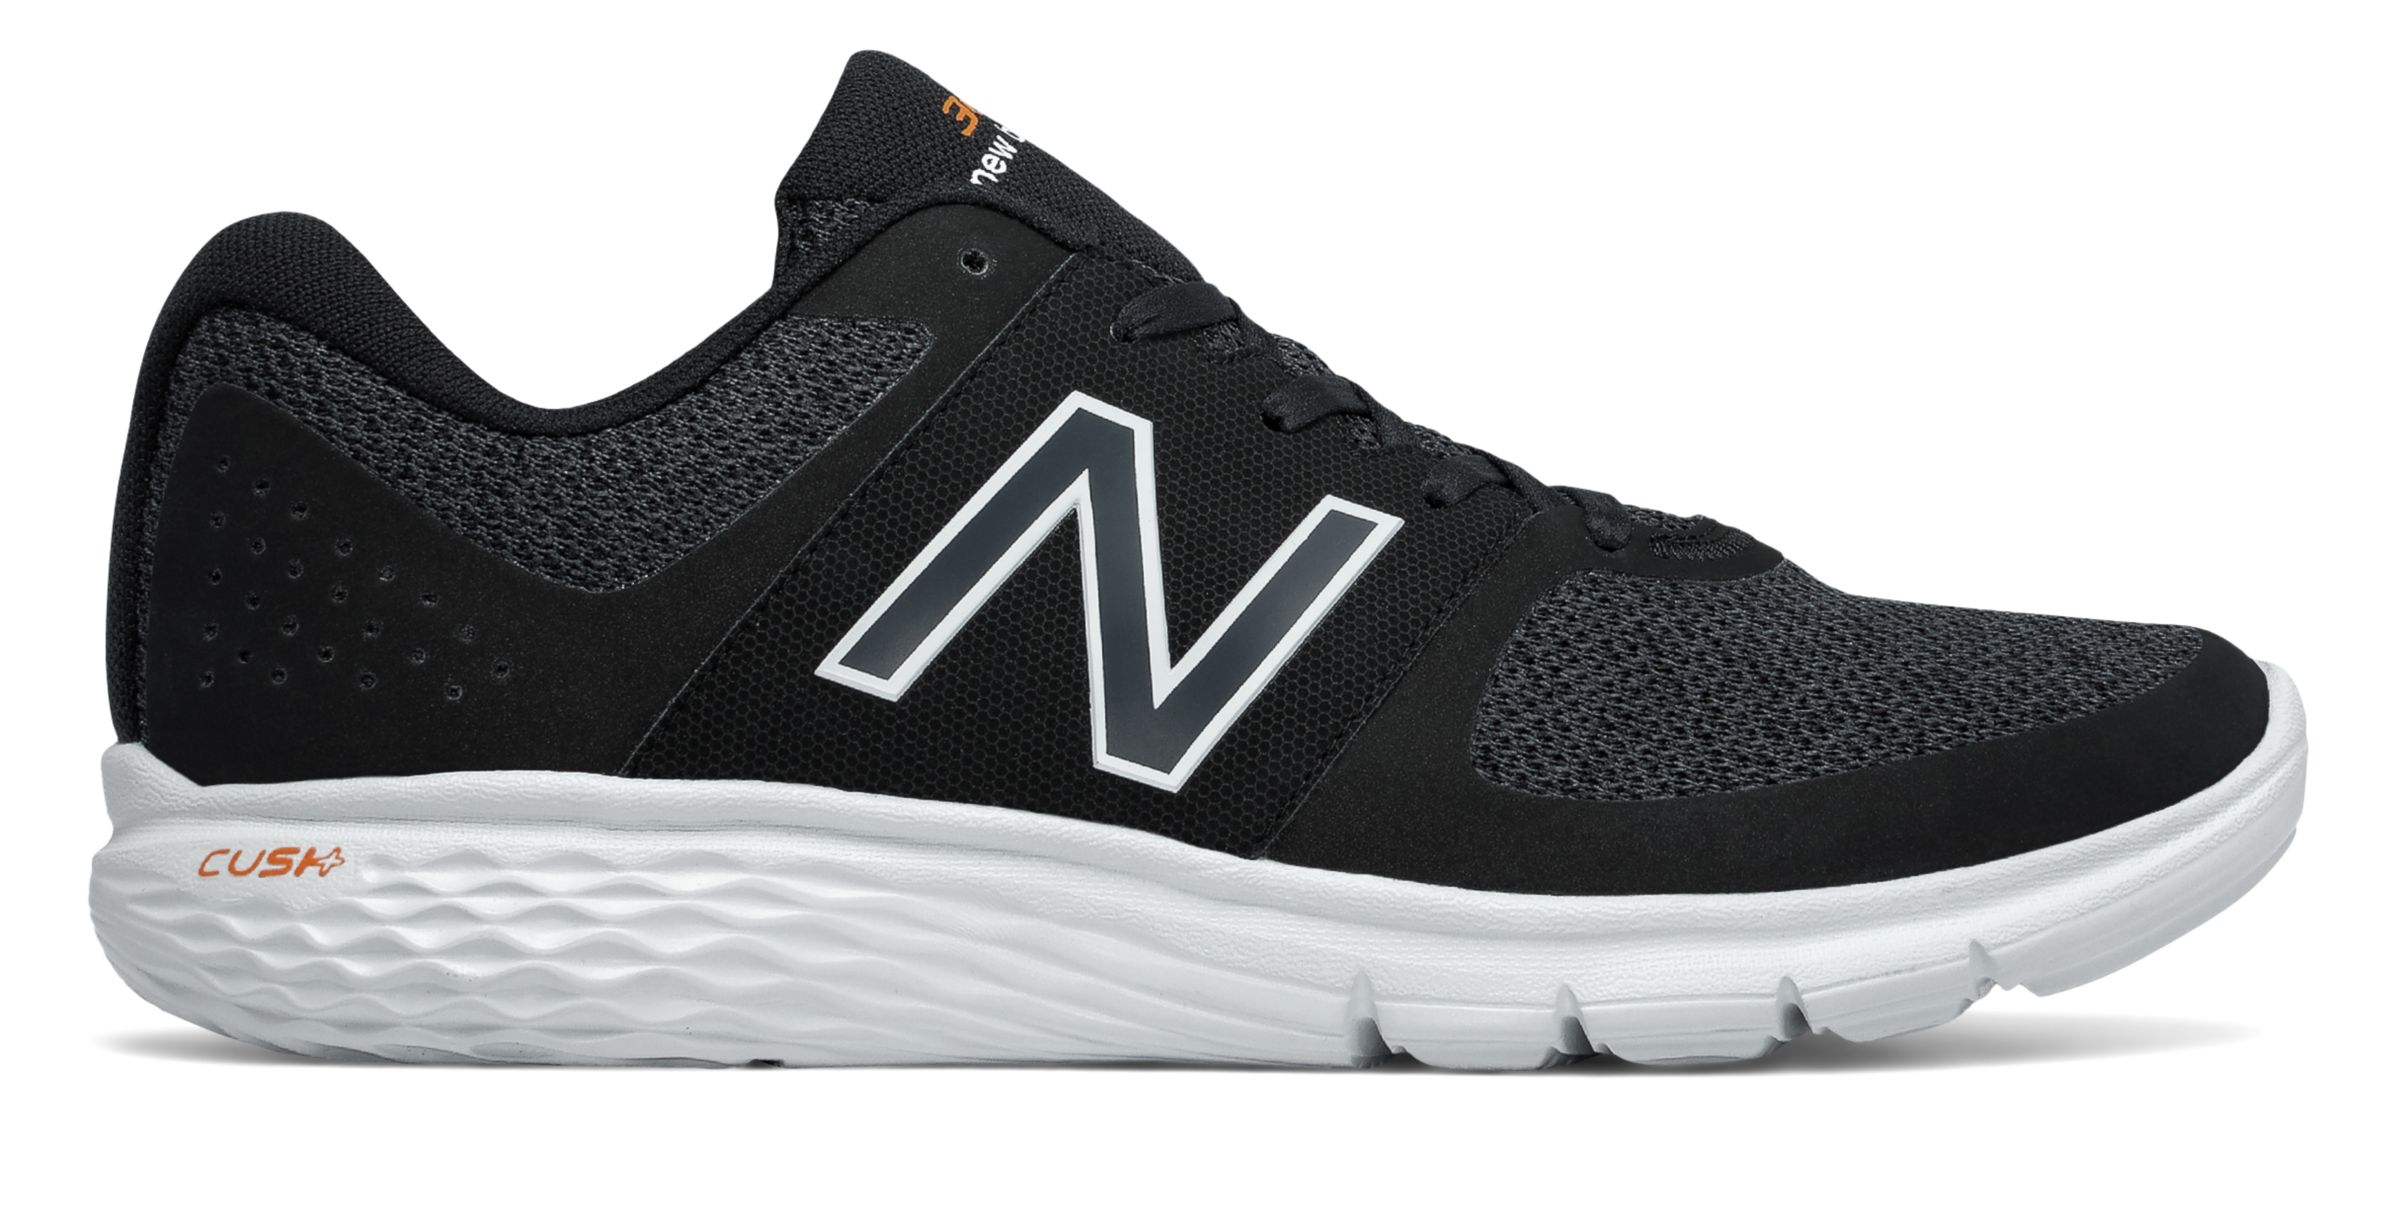 New Balance MA365-V1 on Sale - Discounts Up to 49% Off on MA365BK at Joe's New  Balance Outlet